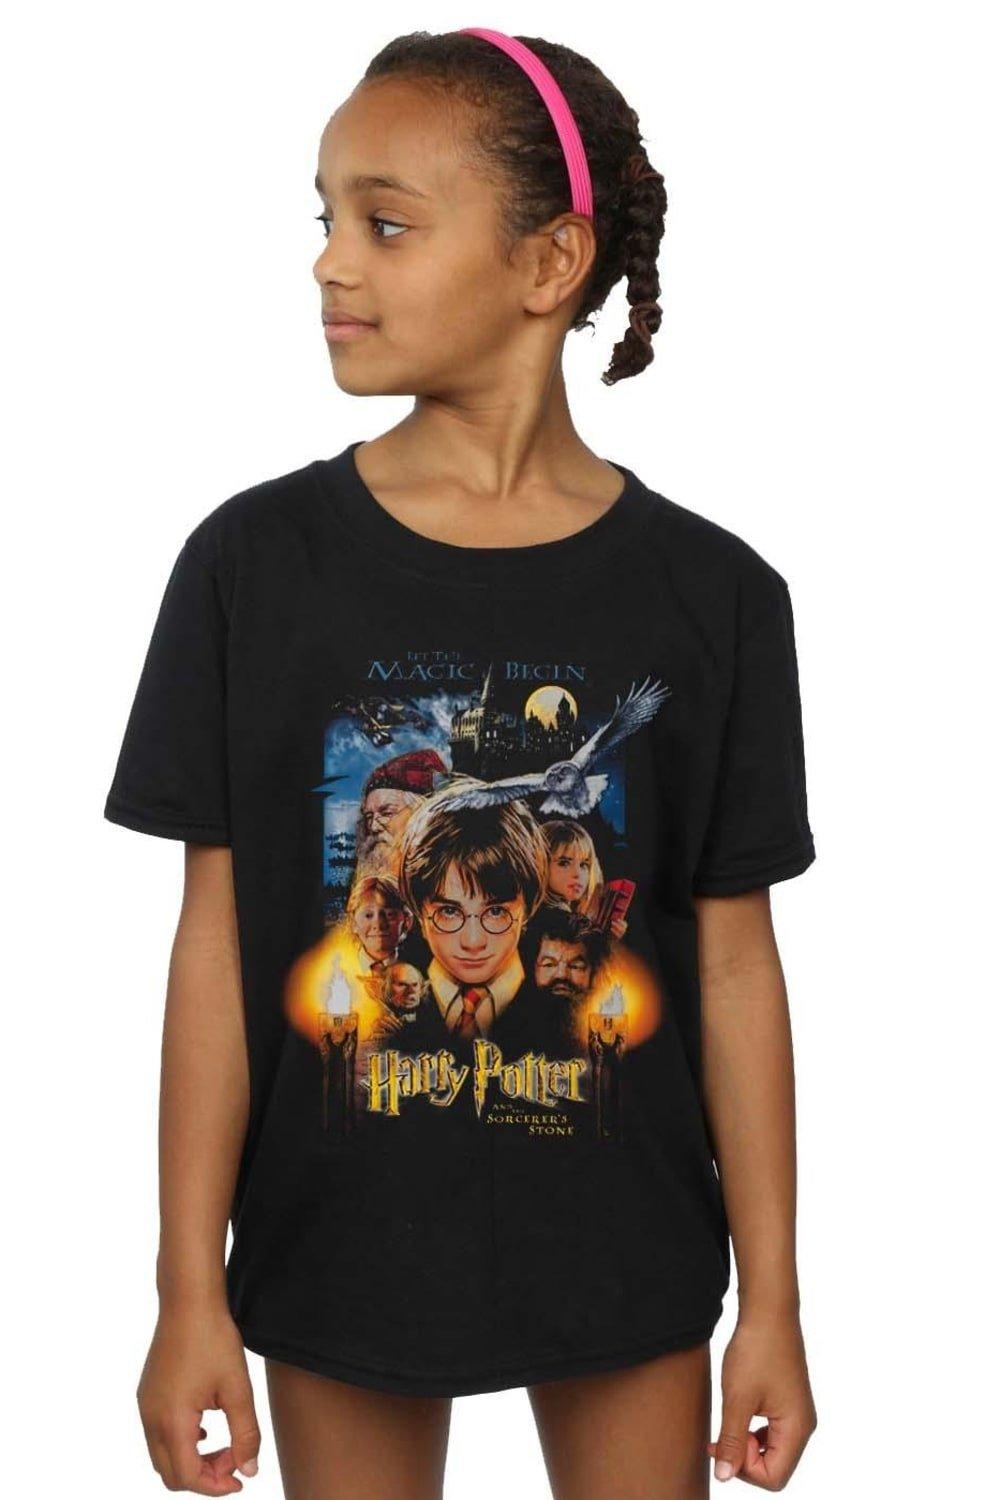 The Sorcerer’s Stone Poster Cotton T-Shirt